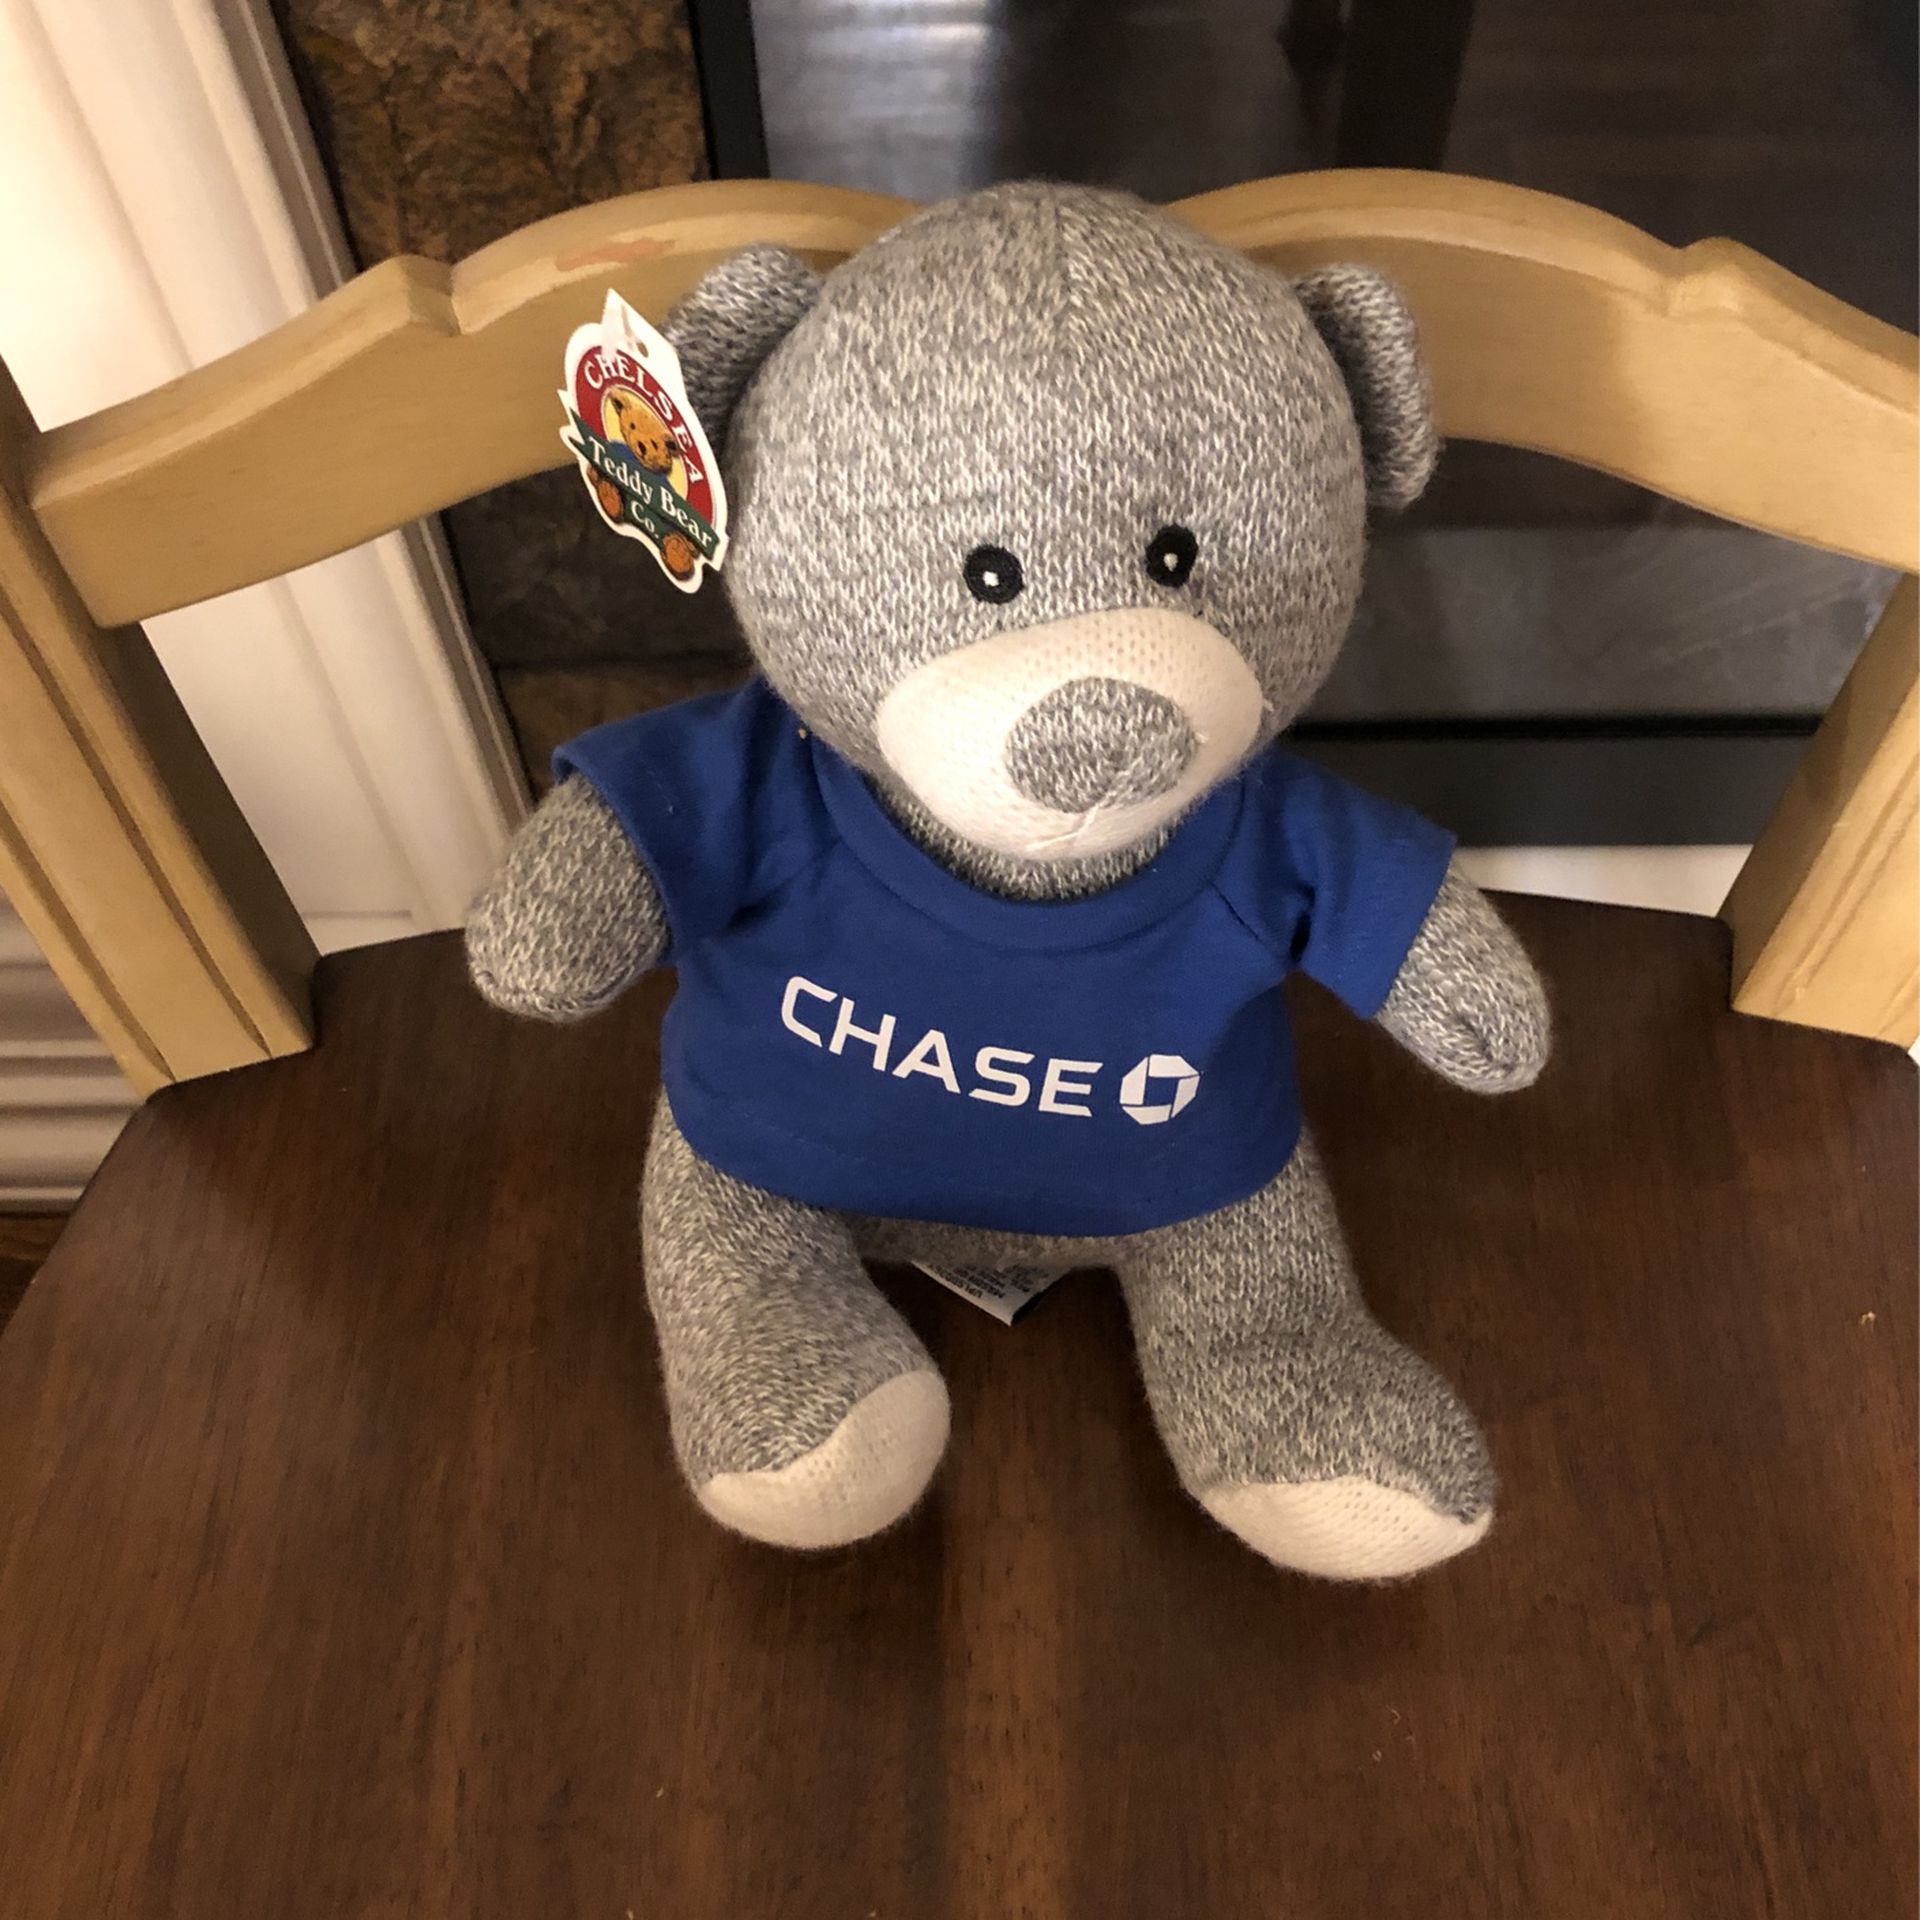 Chelsea (TM) Plush Knitted Teddy Bear - Gray - Chase Bank Edition